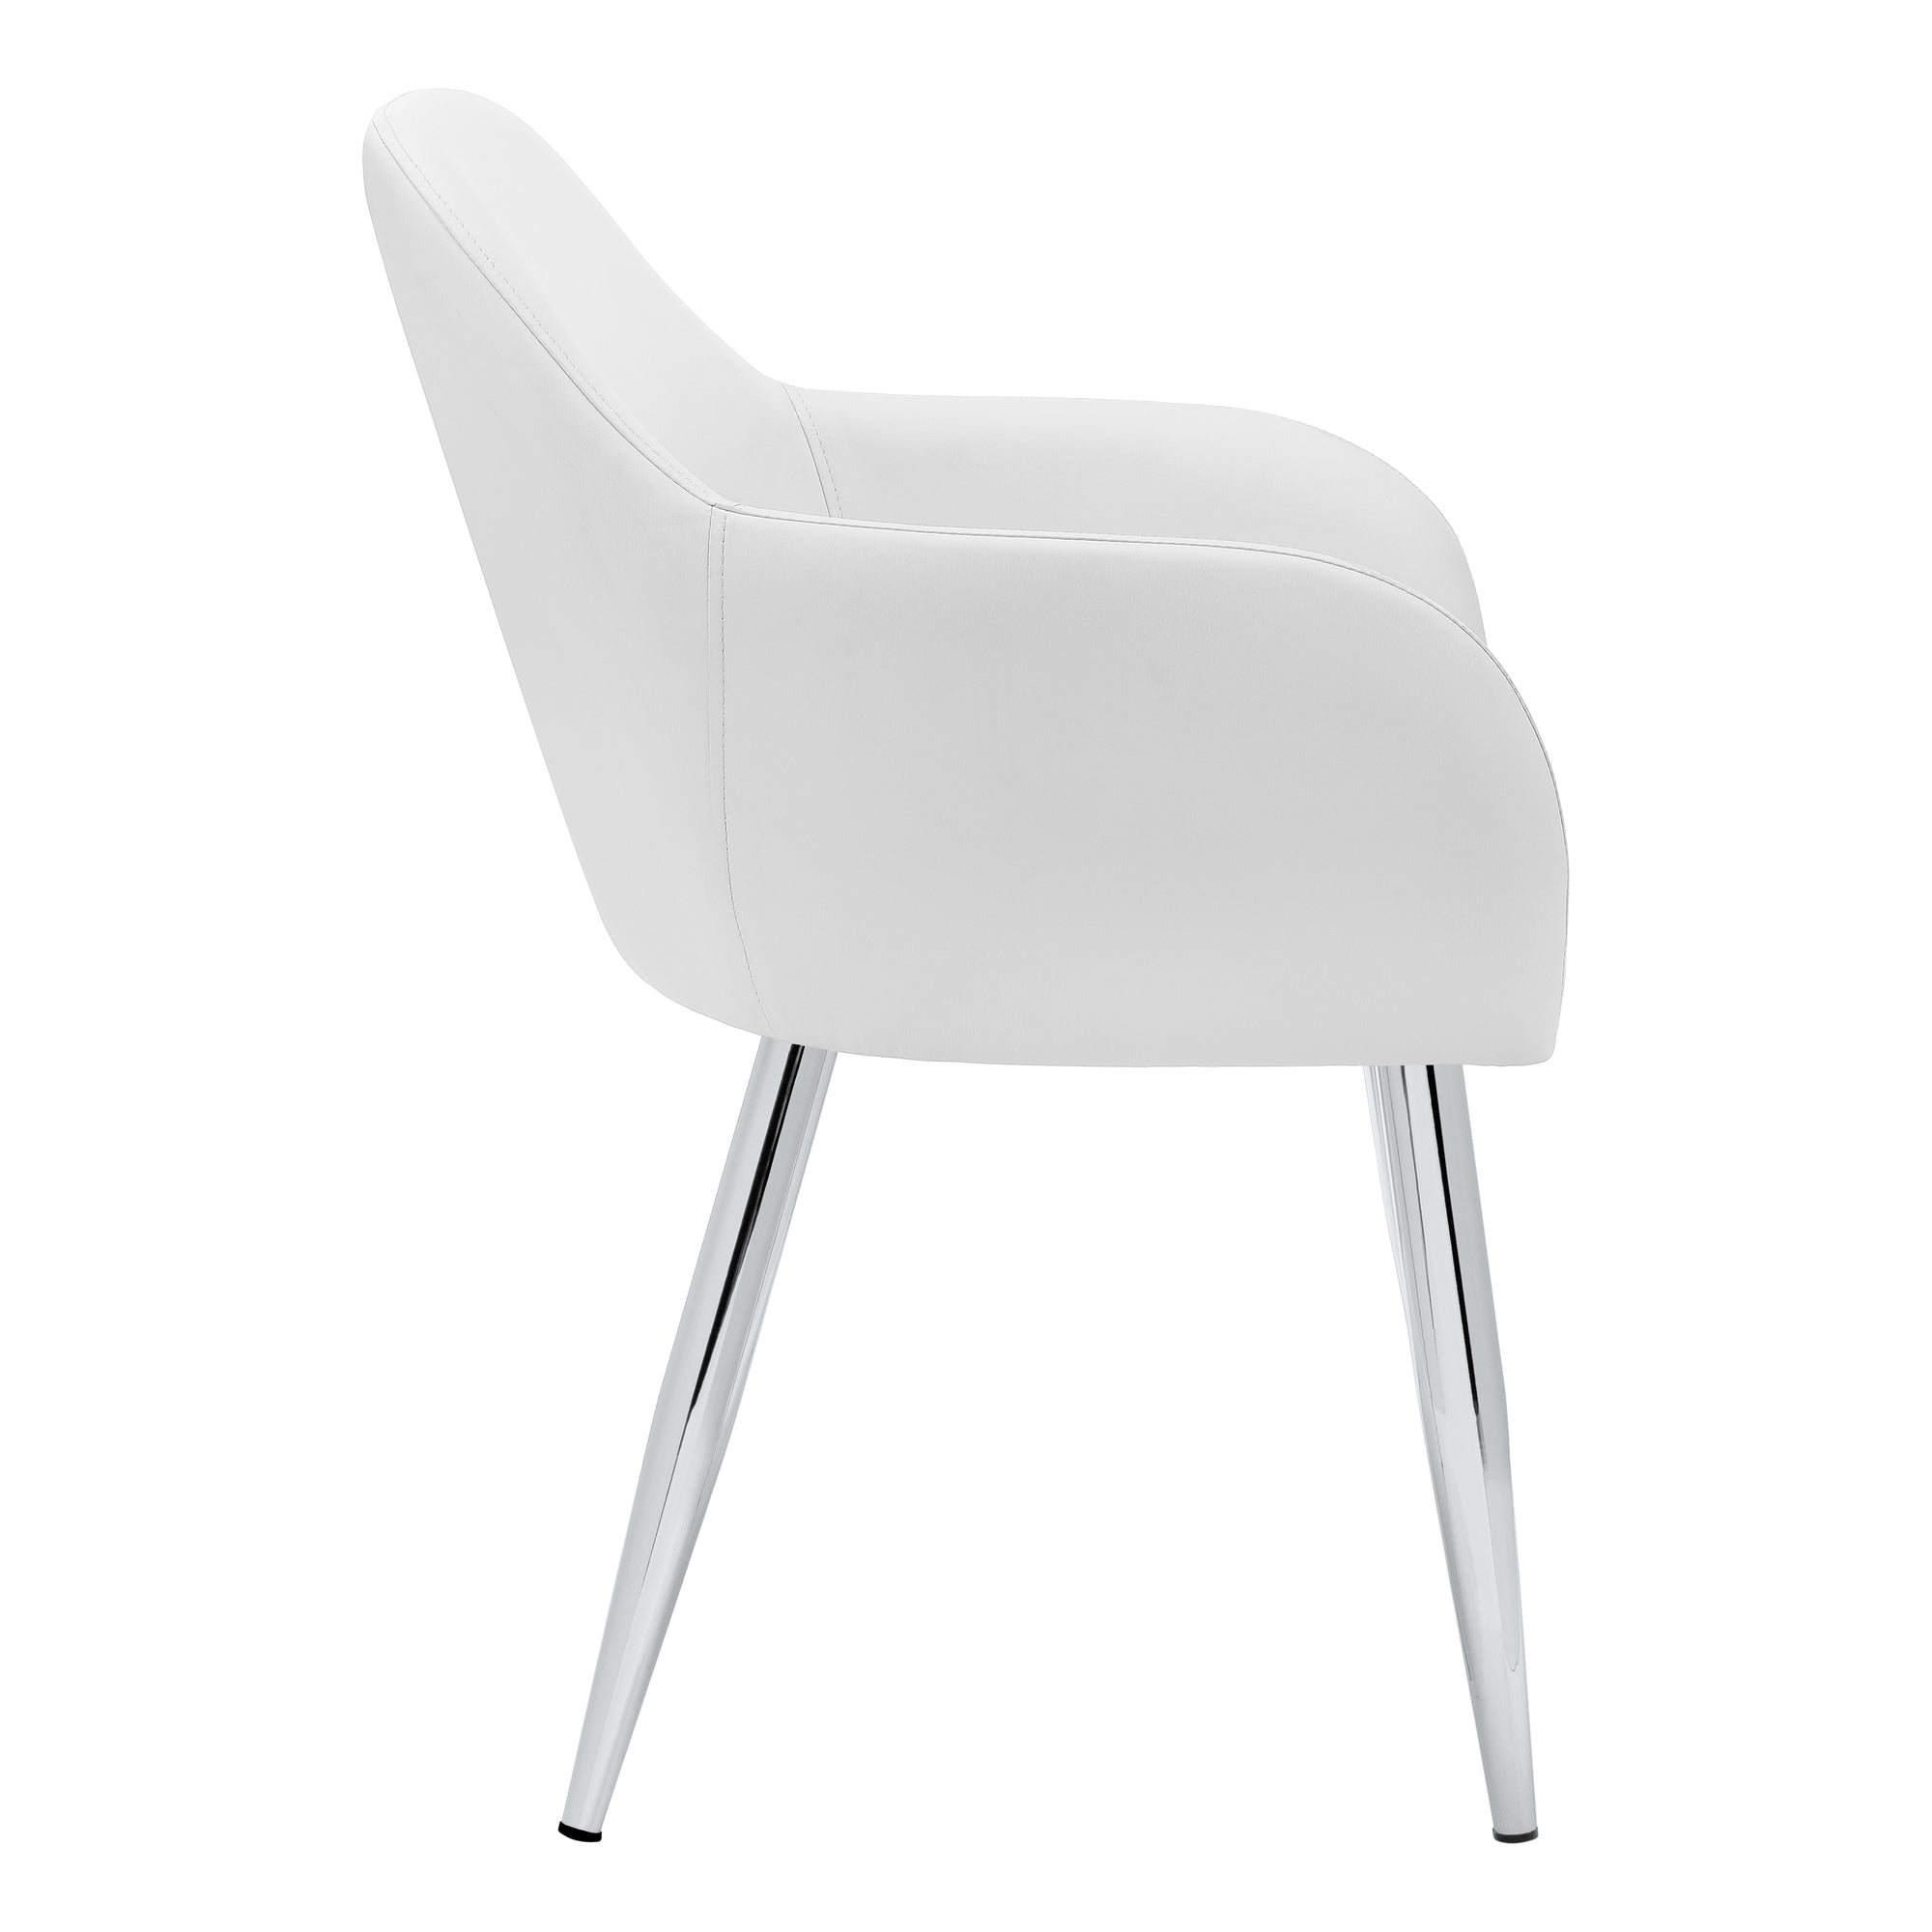 MN-821190    Dining Chair, Set Of 2, Side, Pu Leather-Look, Upholstered, Metal Legs, Kitchen, Dining Room, Leather Look, Metal Legs, White, Chrome, Contemporary, Modern